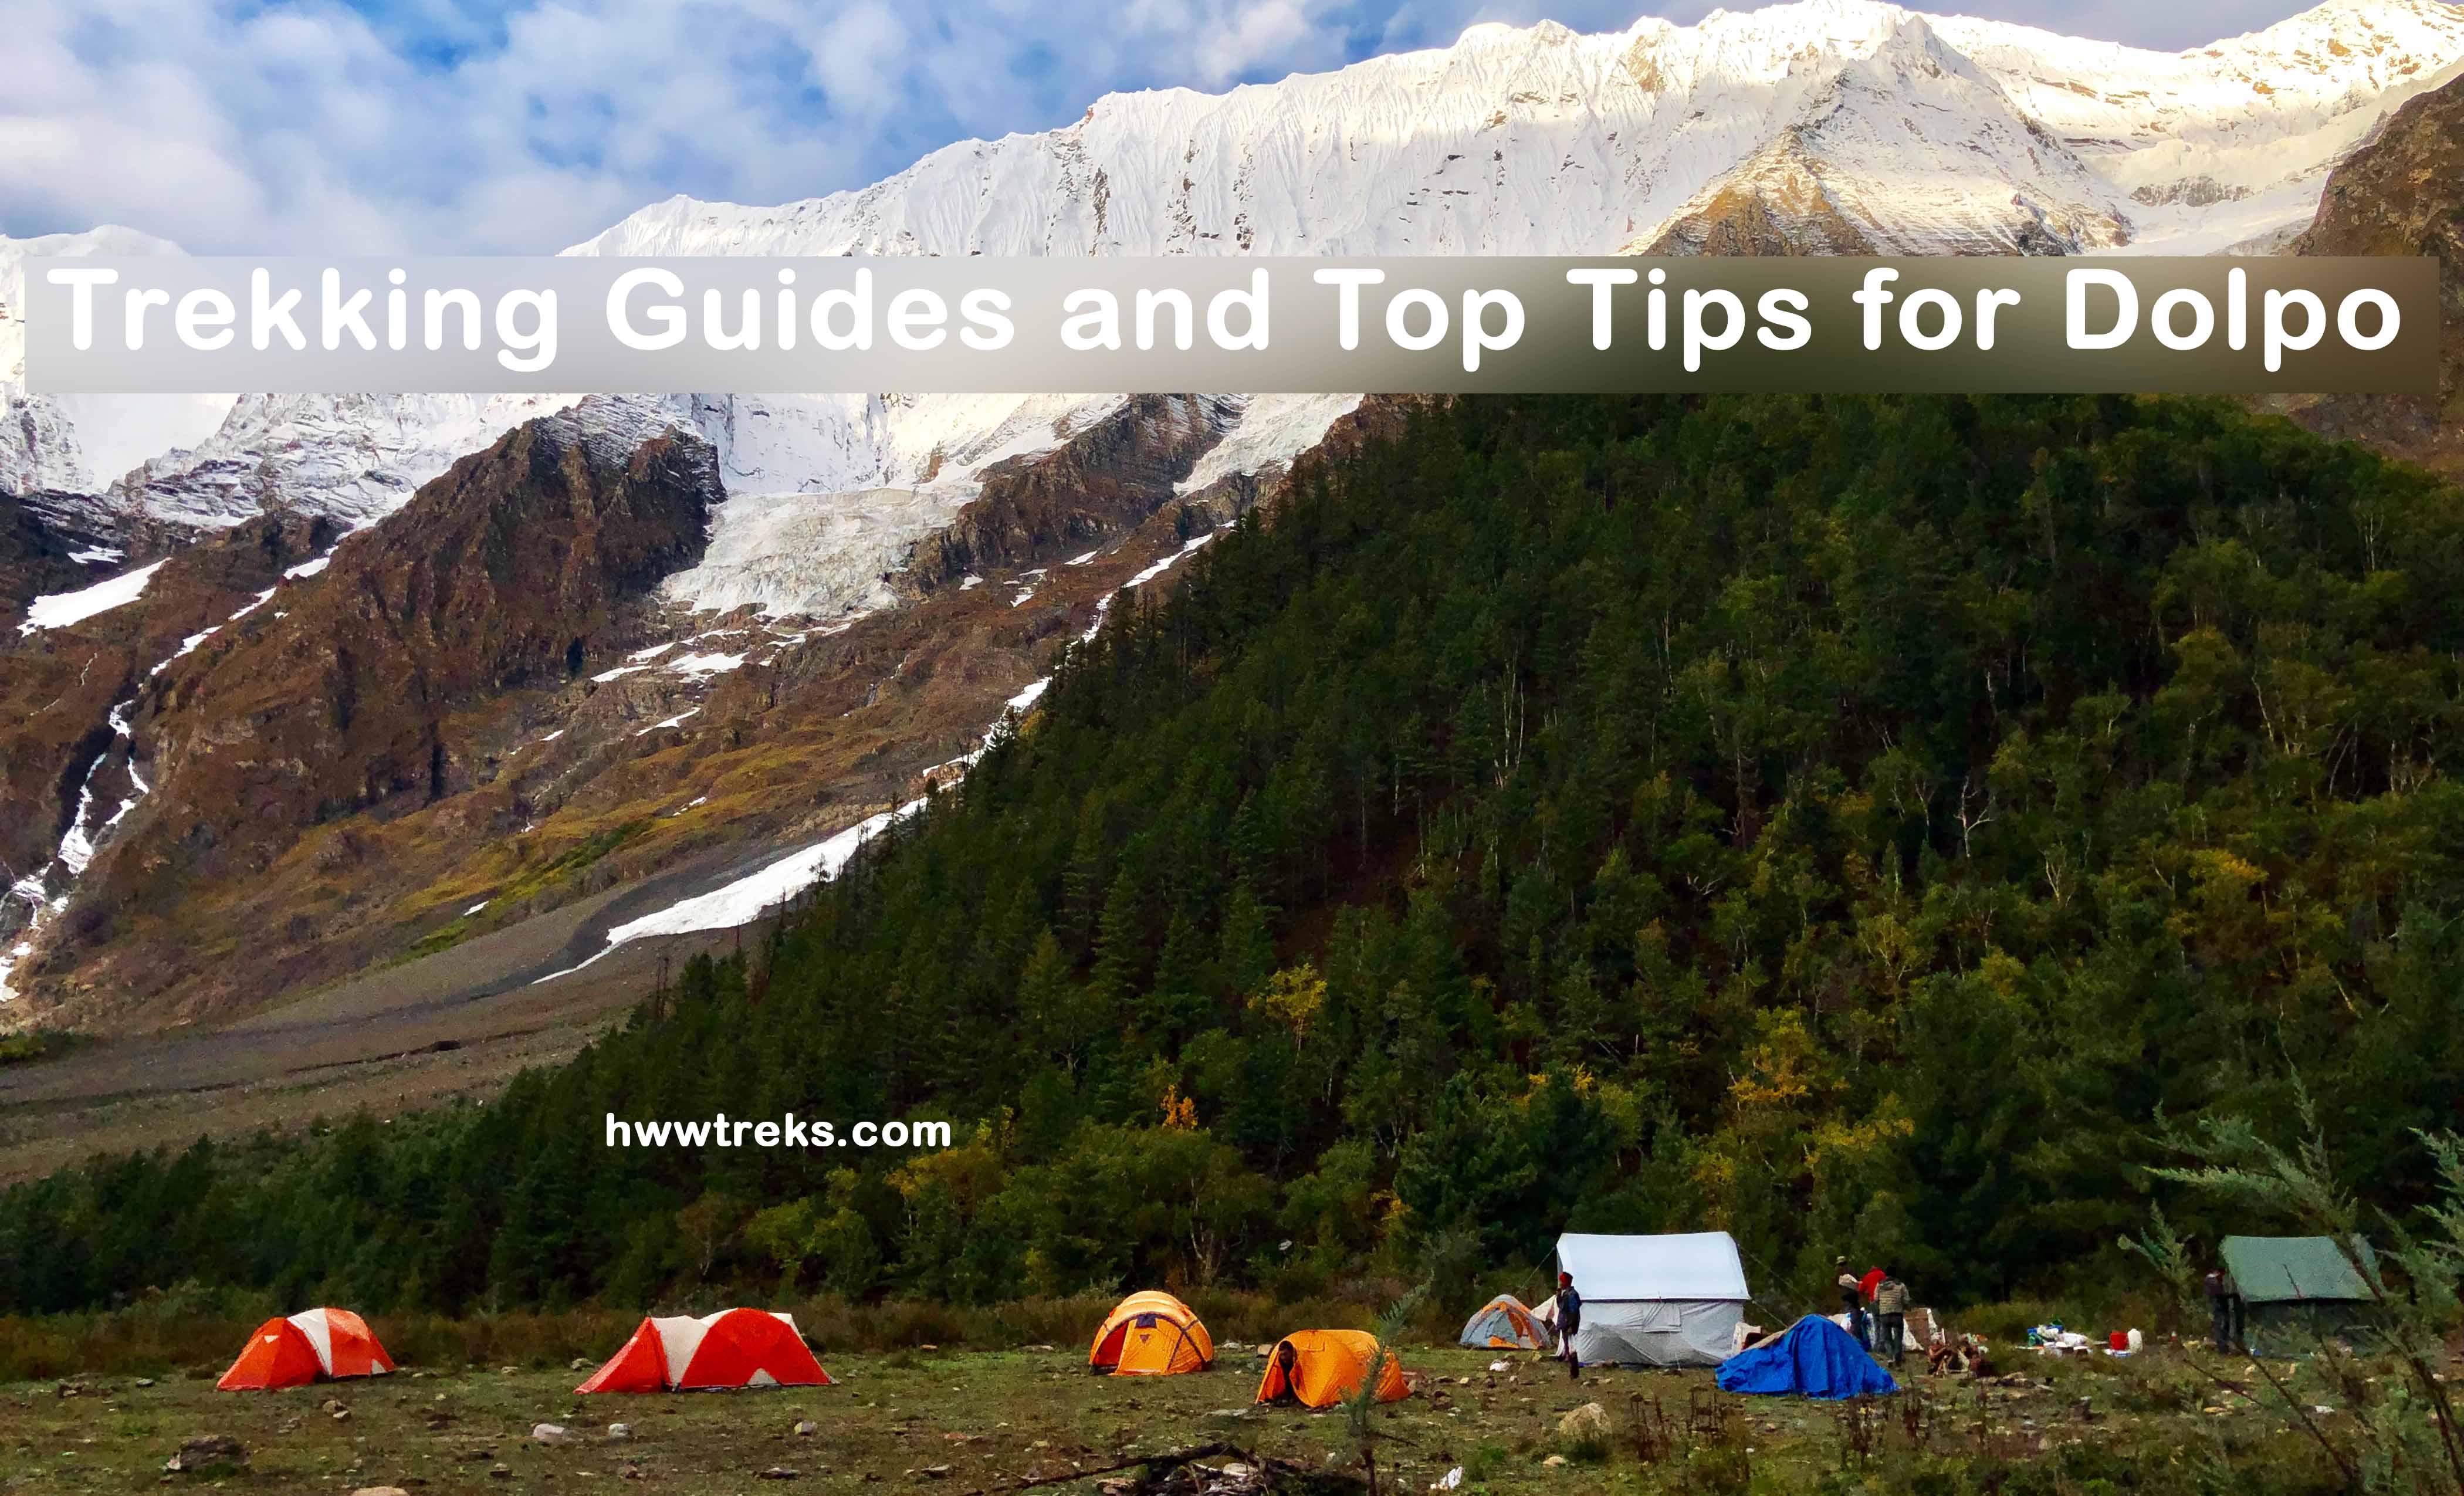 An essential guide and Top Tips for Trekking in Dolpo Region of Nepal